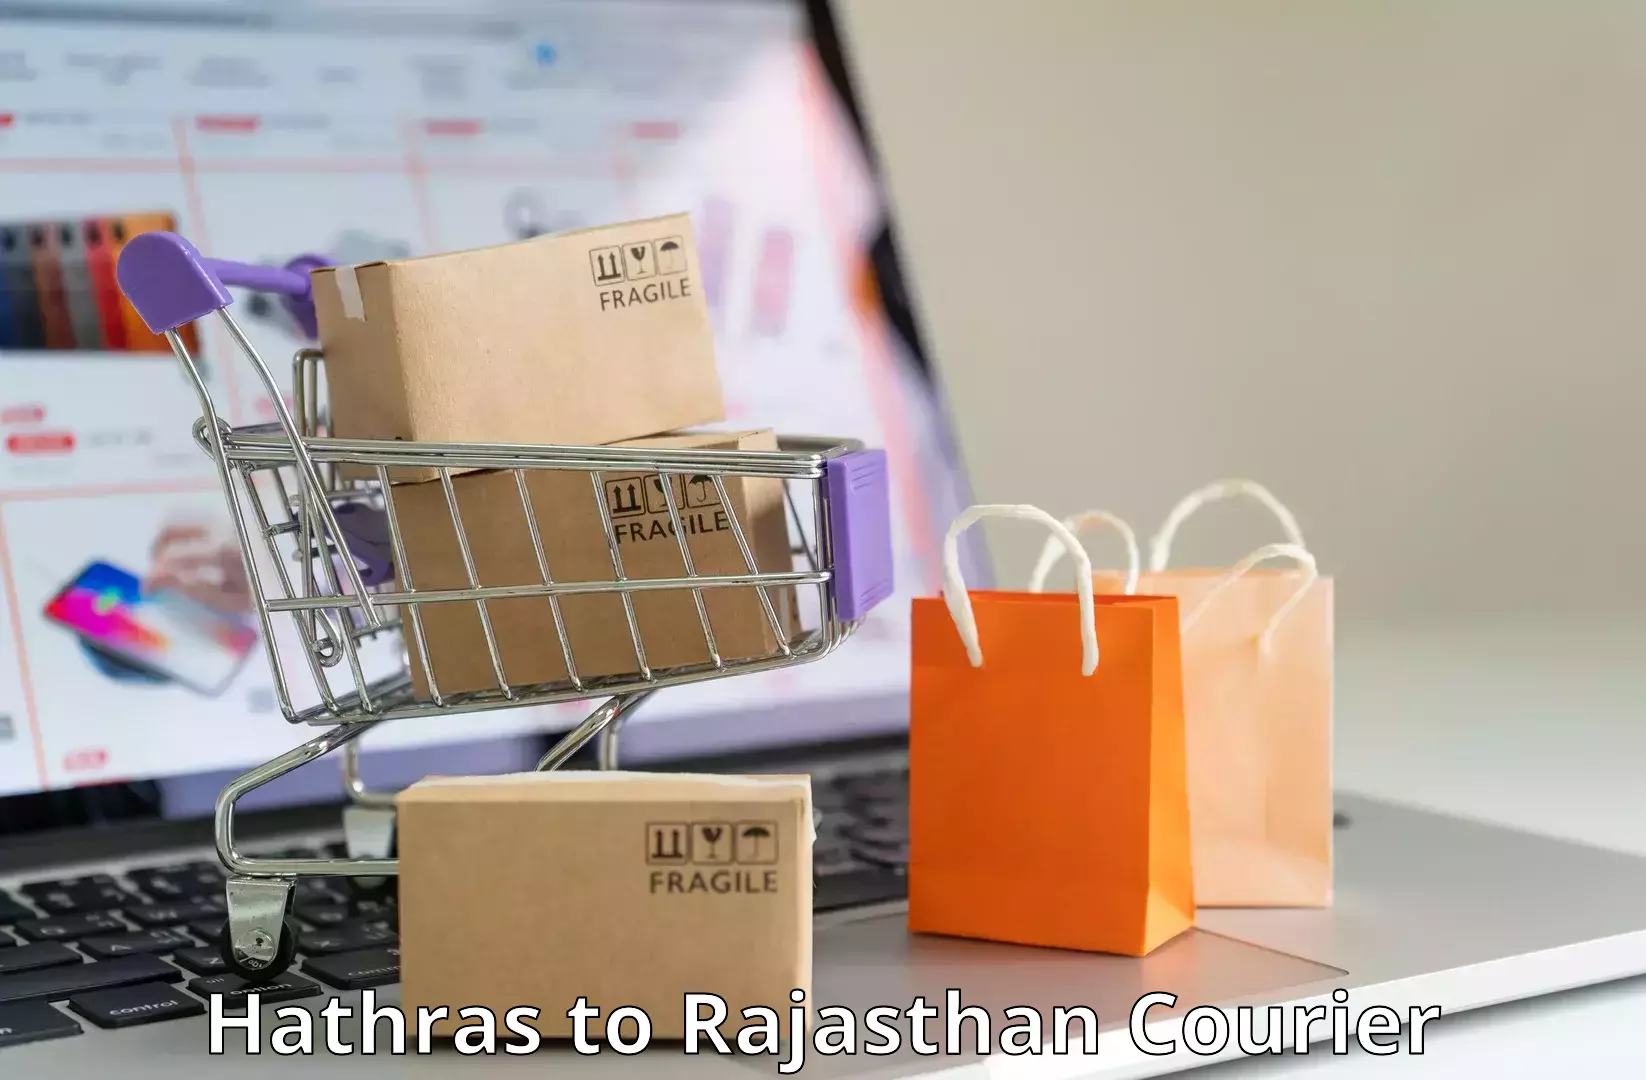 Express delivery network Hathras to Balesar